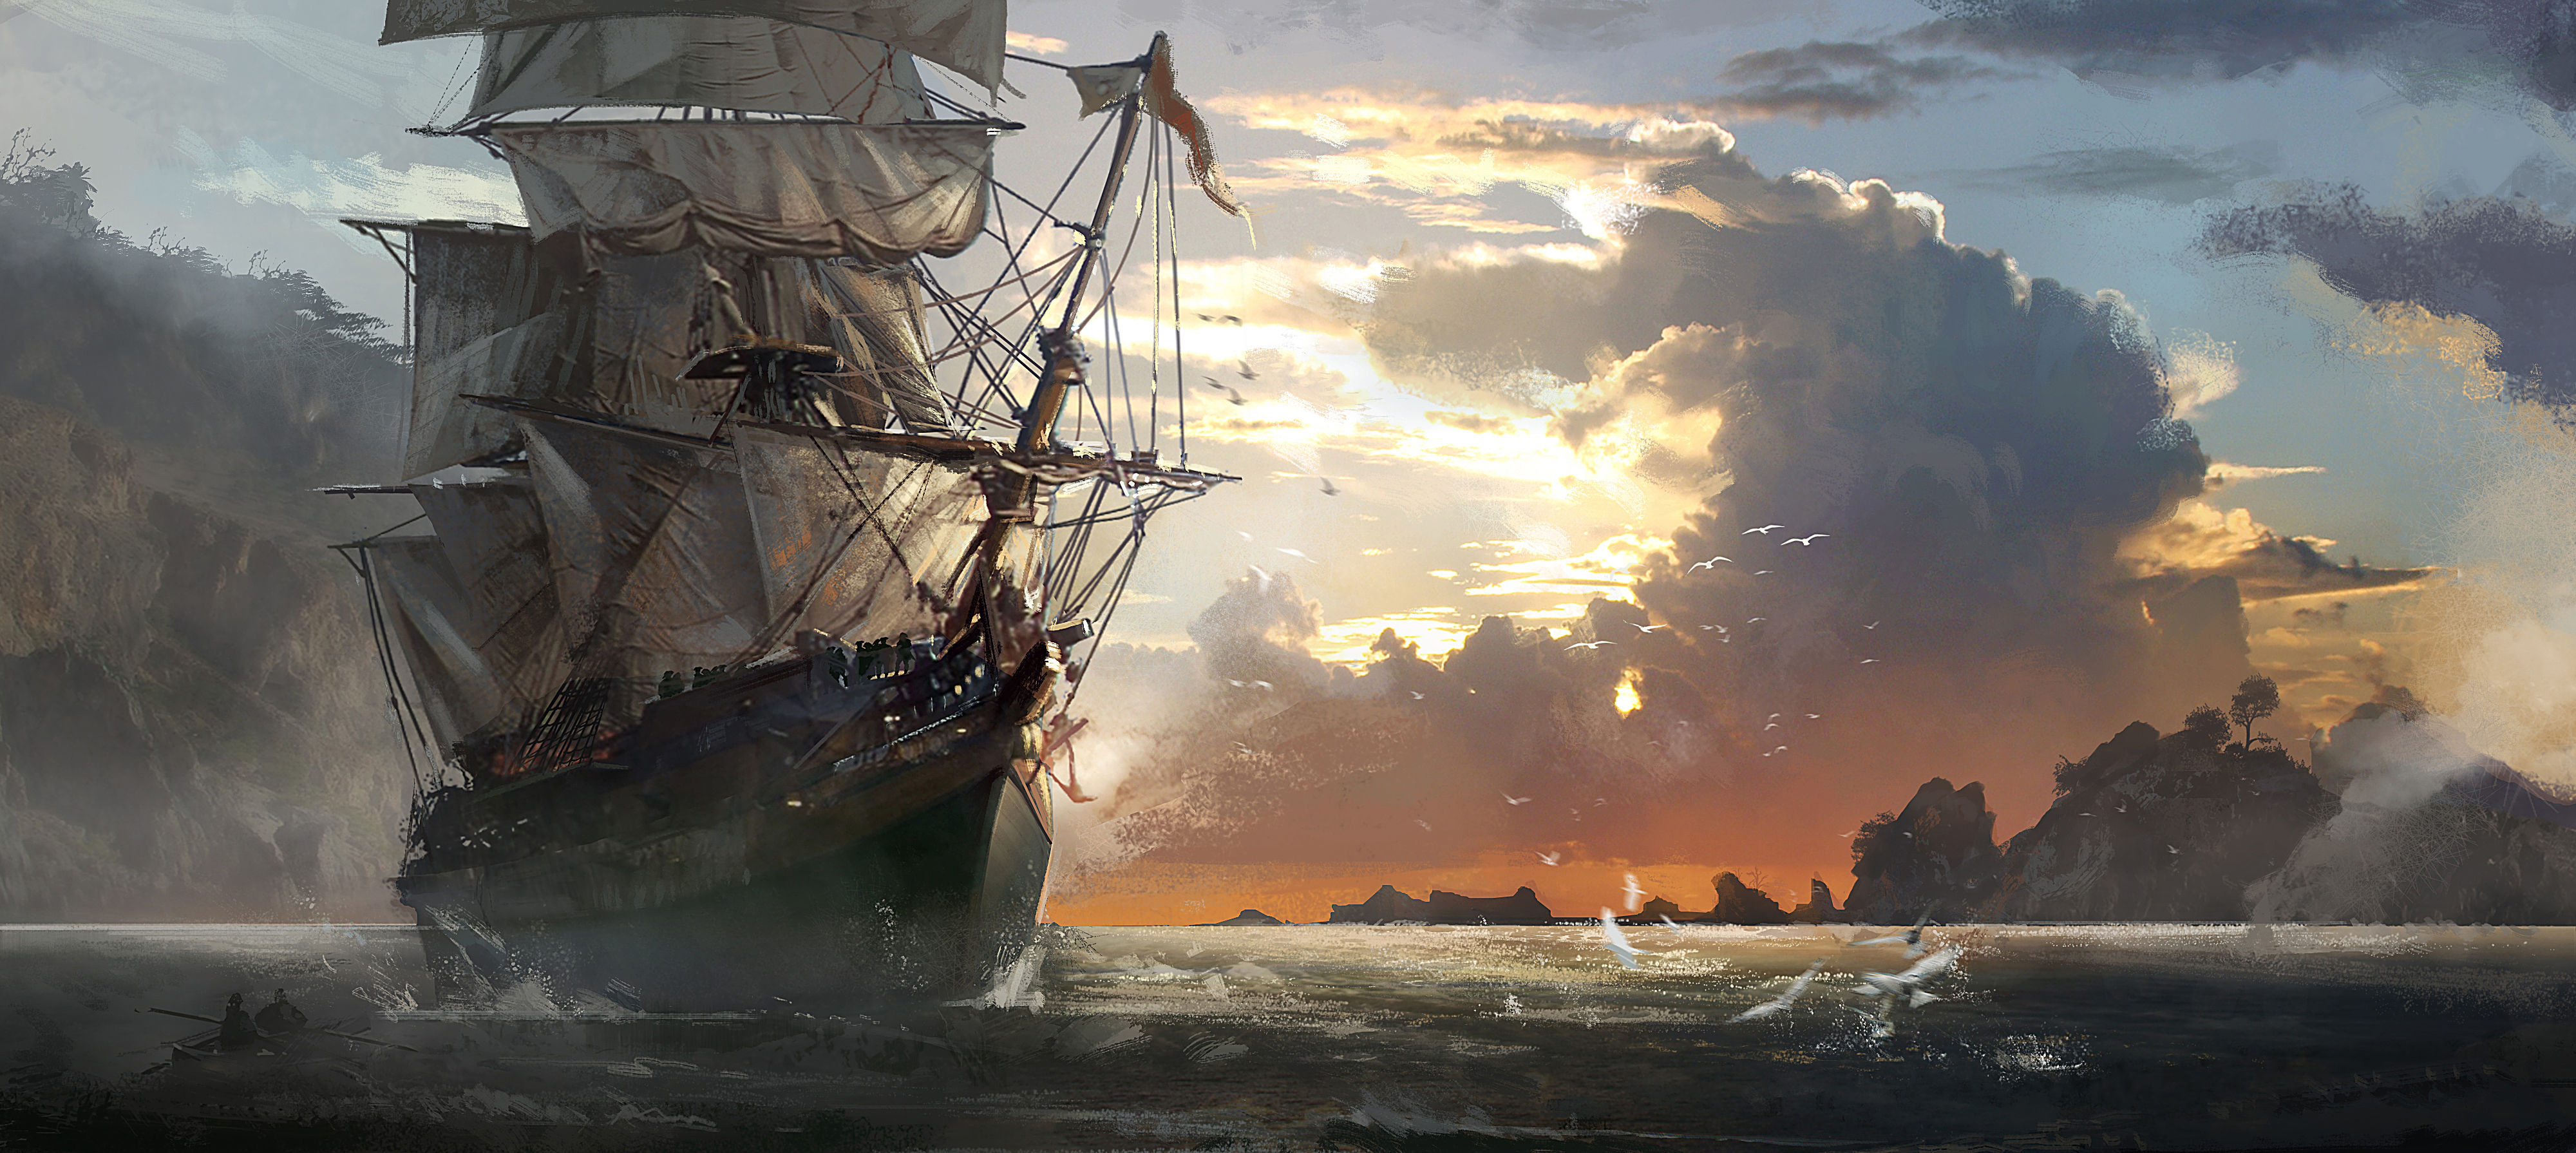 private wallpaper,sailing ship,first rate,clipper,east indiaman,tall ship